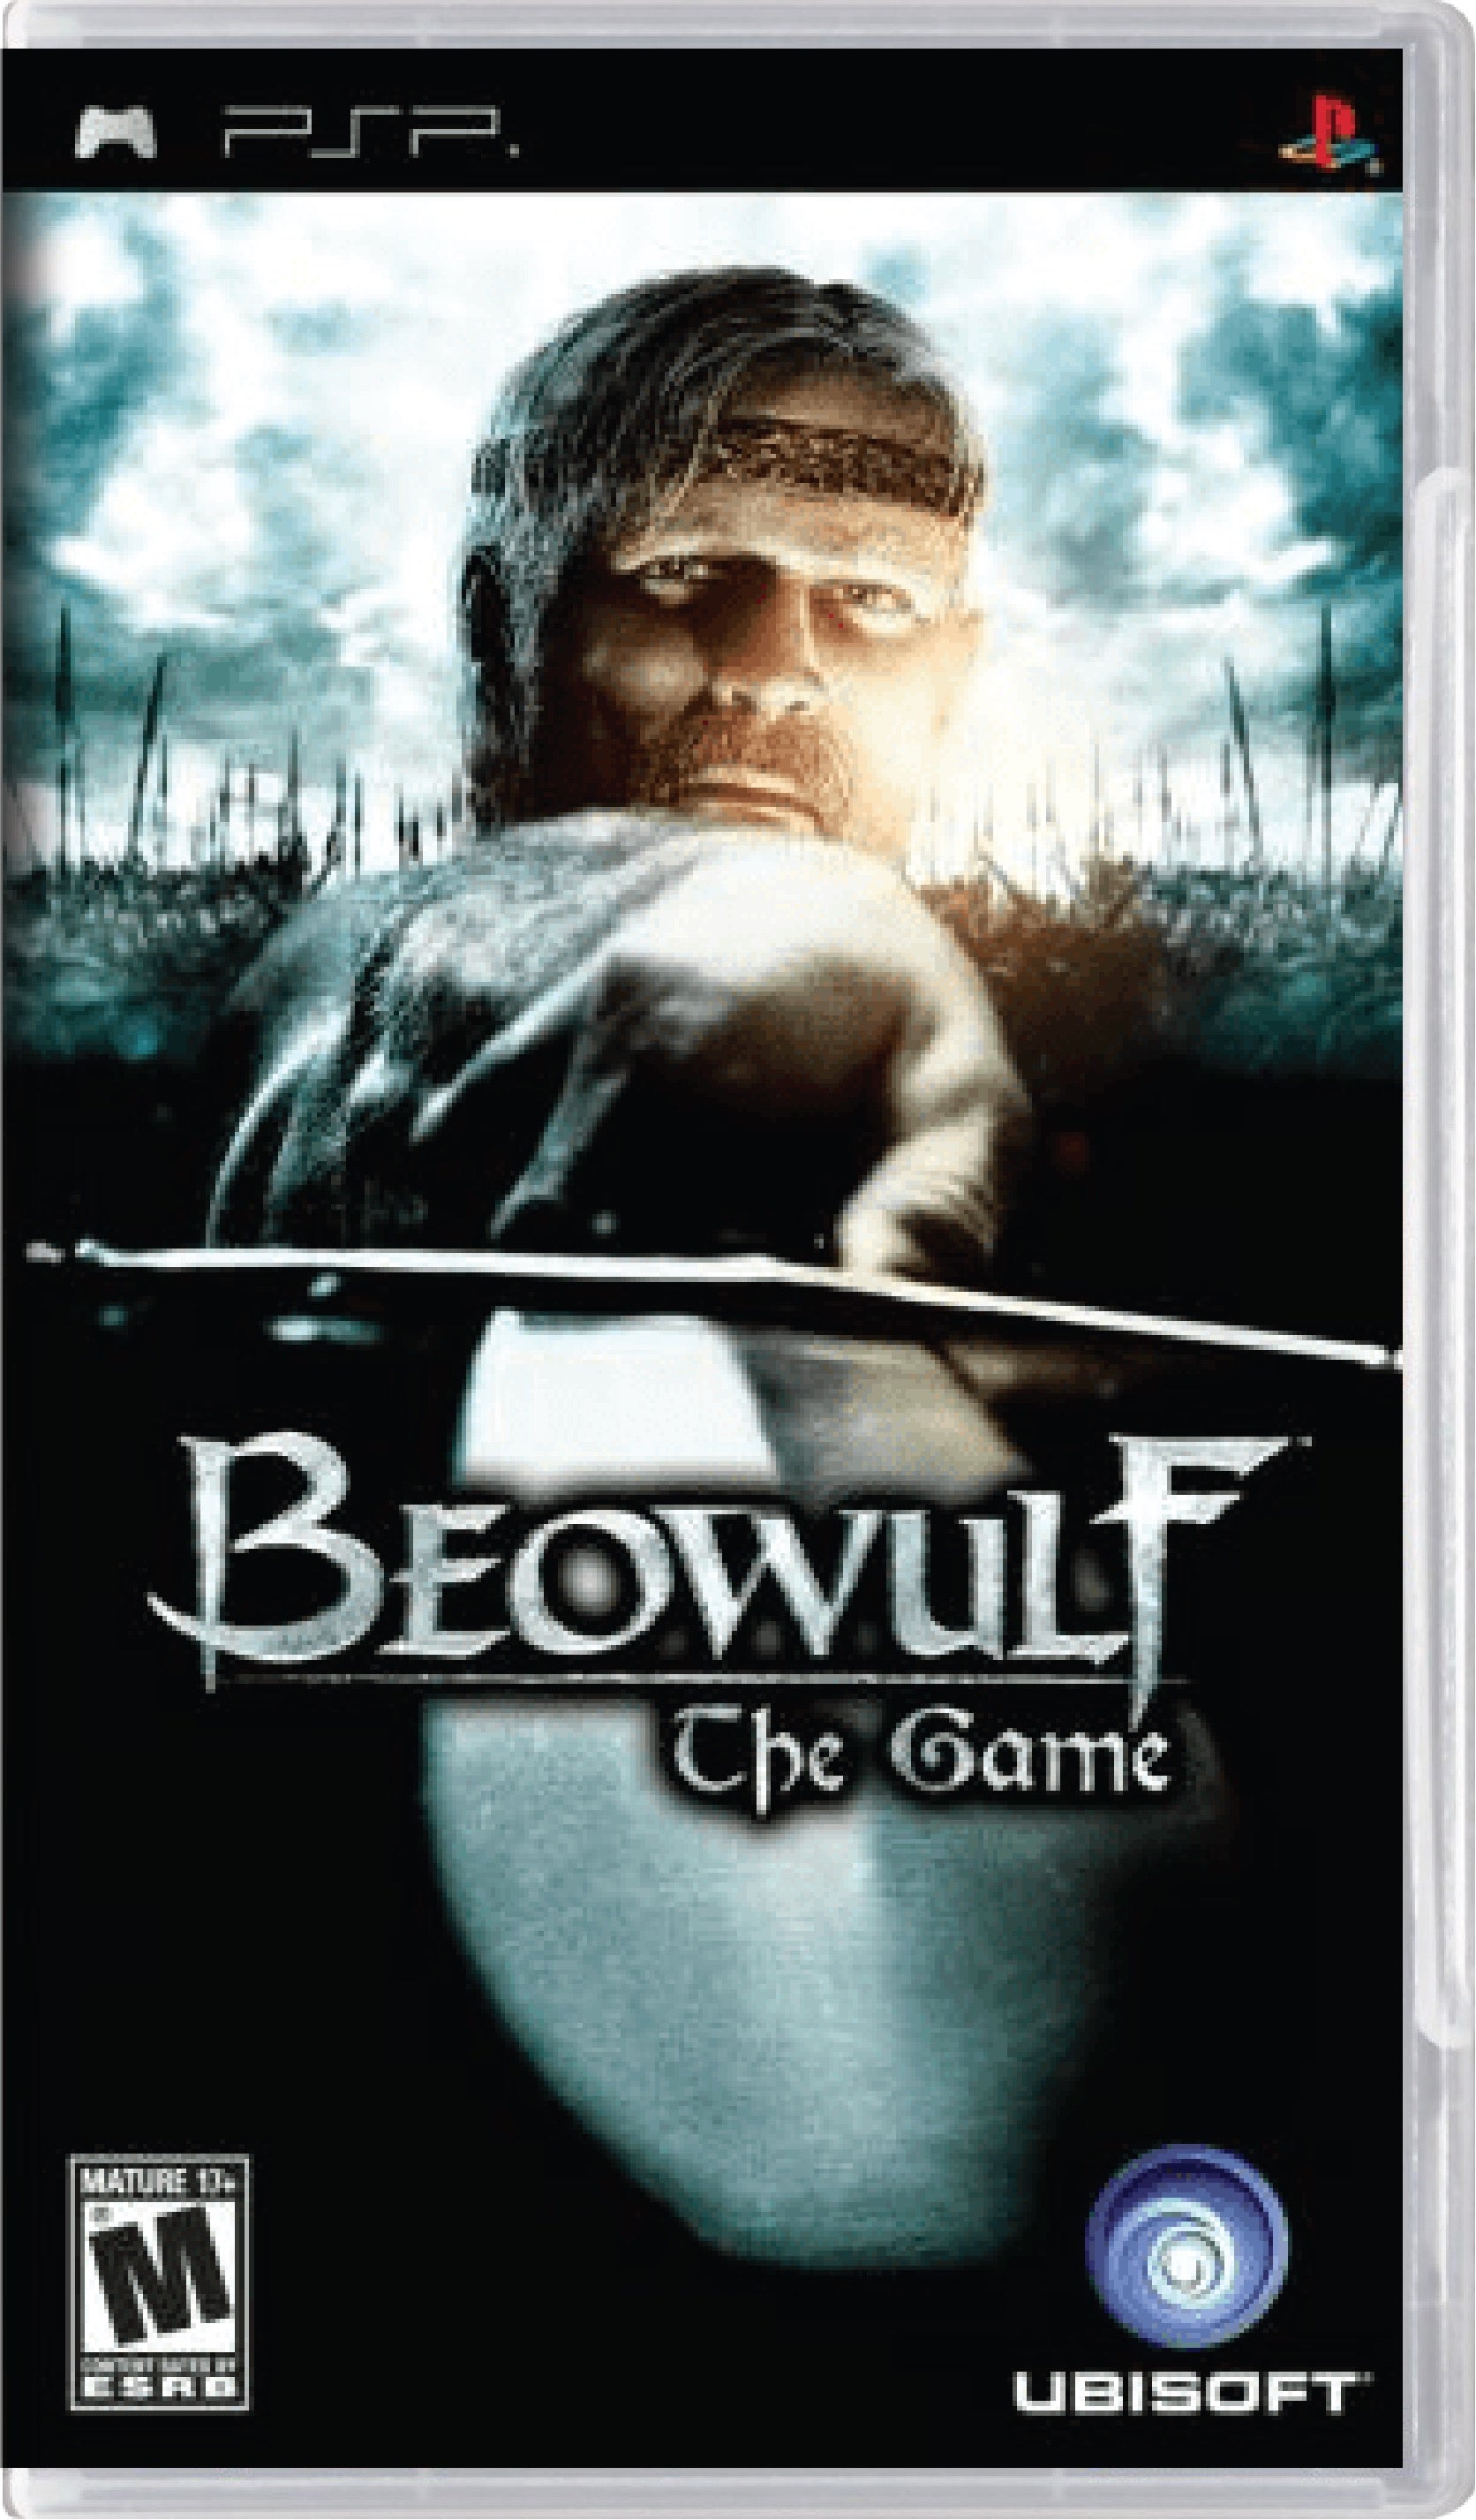 Beowulf Cover Art